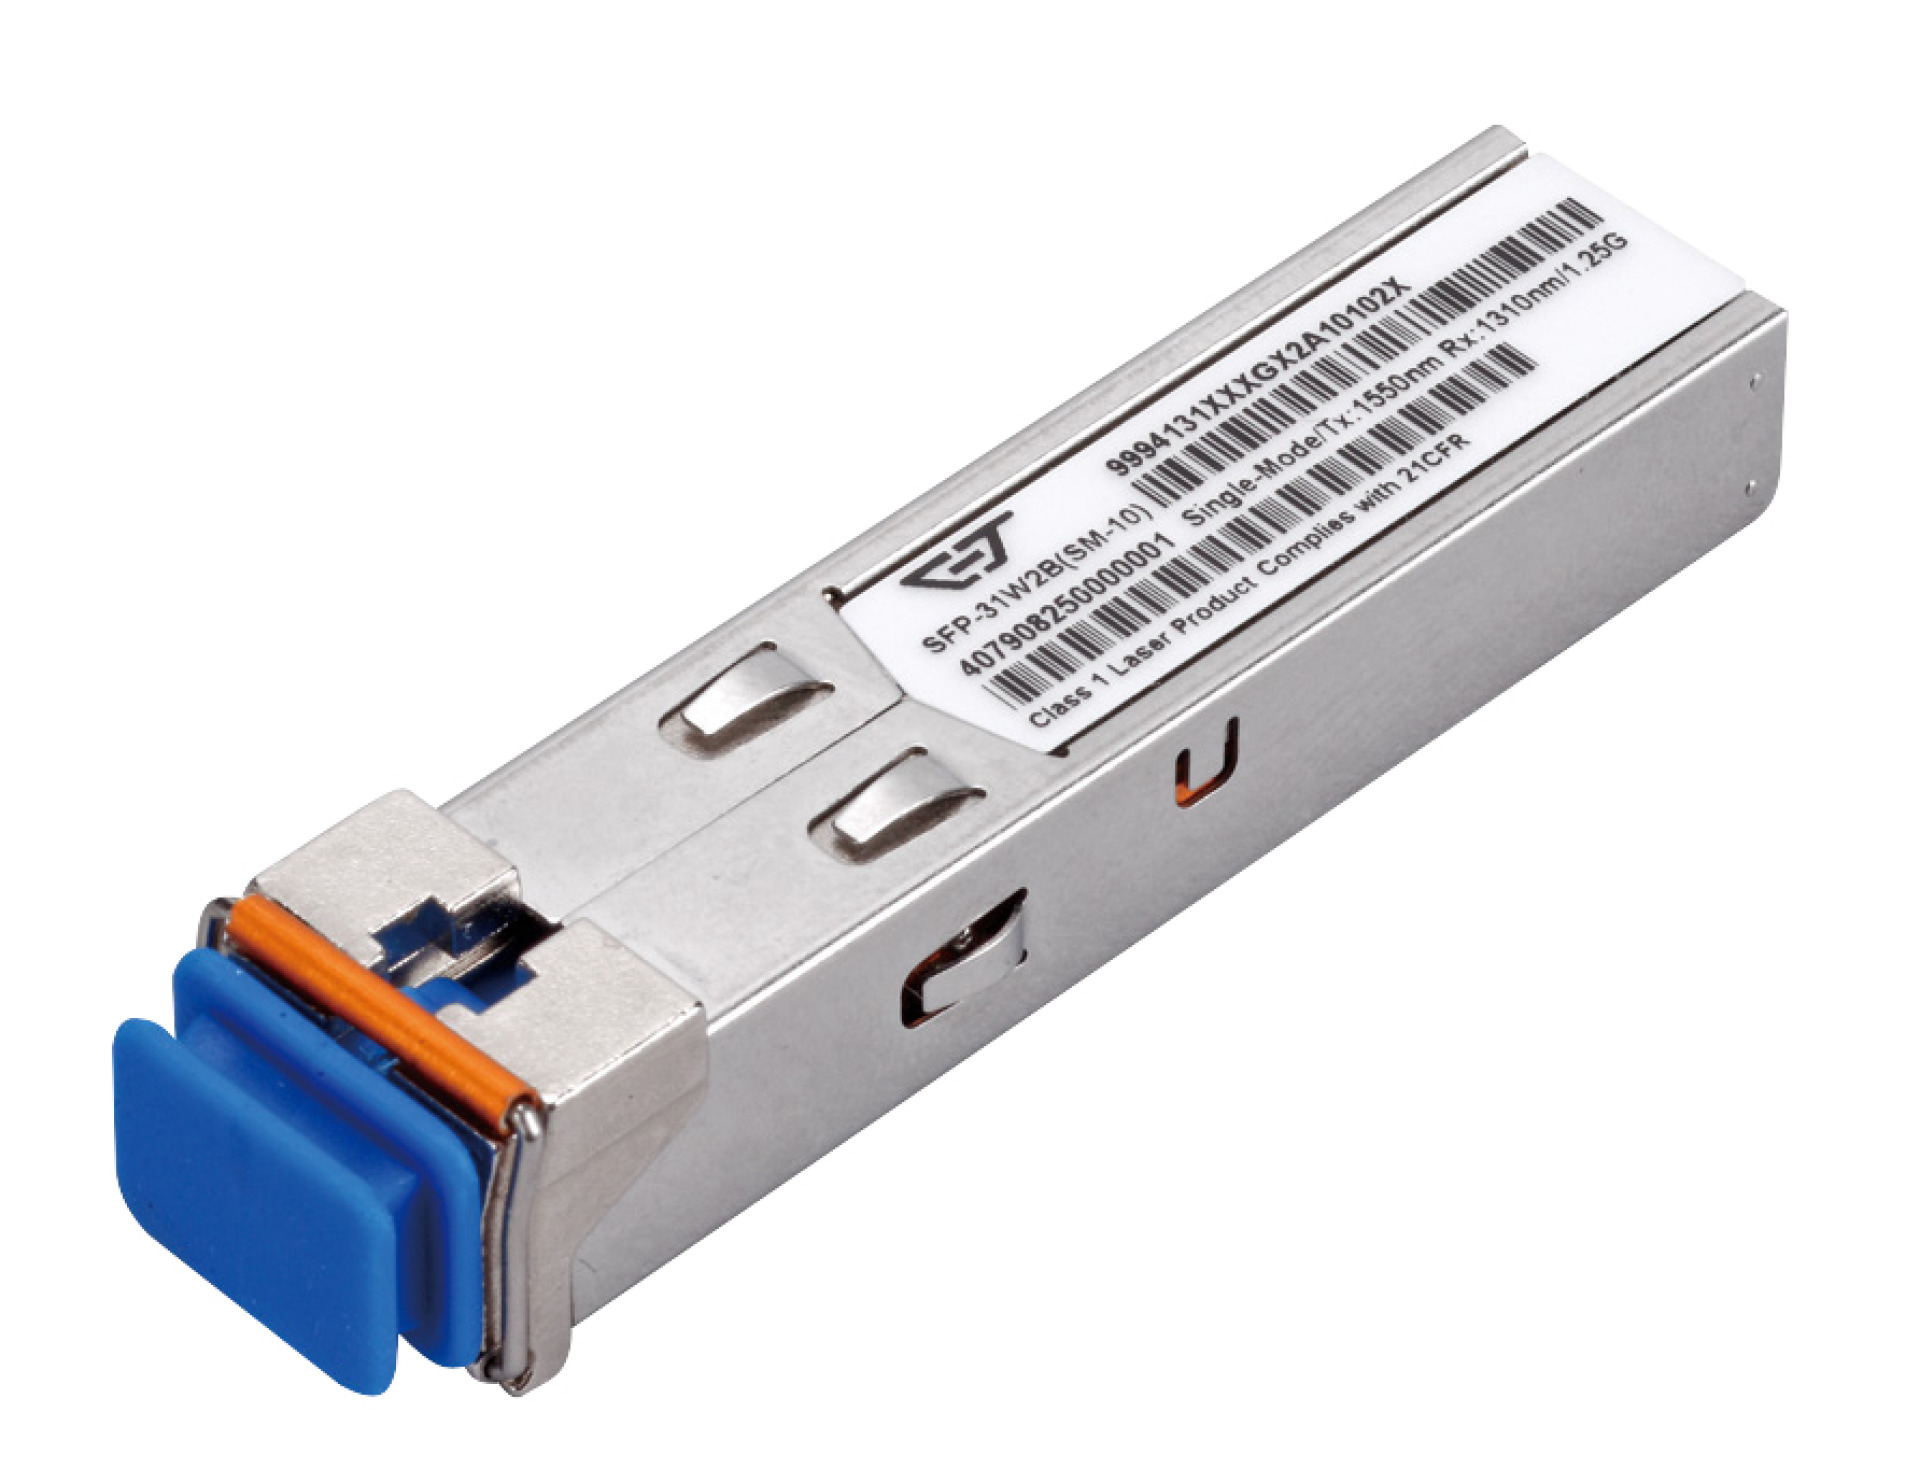 SFP 100/1000Mbps Dual Rate,WDM, LC, 10km, TX1310/RX1550nm, 0° to 70°C